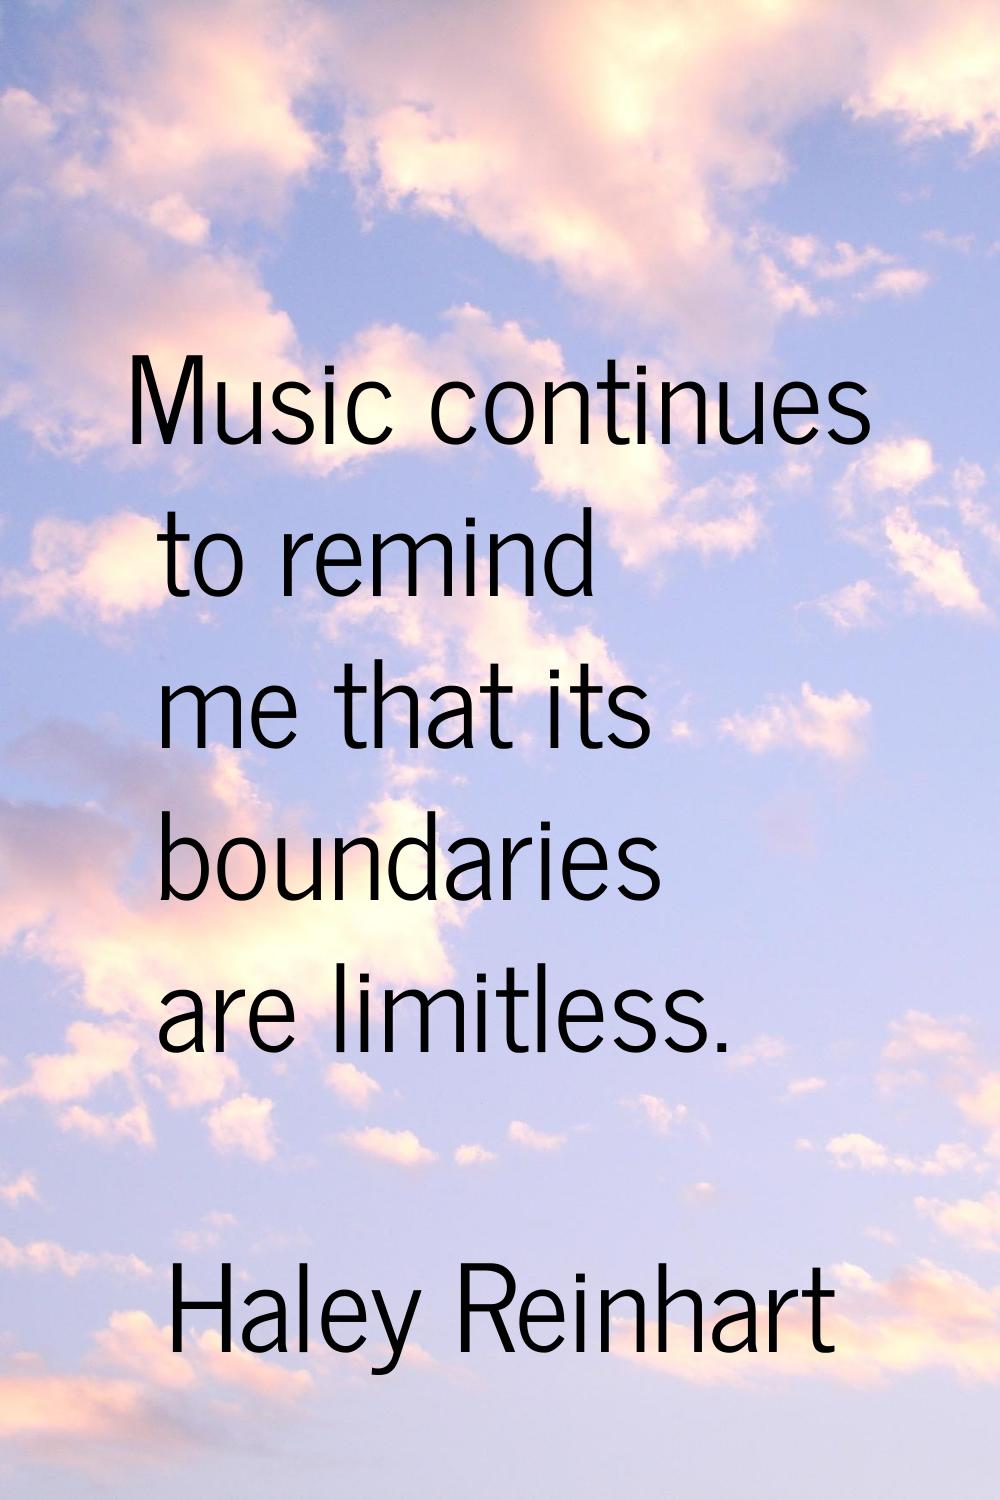 Music continues to remind me that its boundaries are limitless.